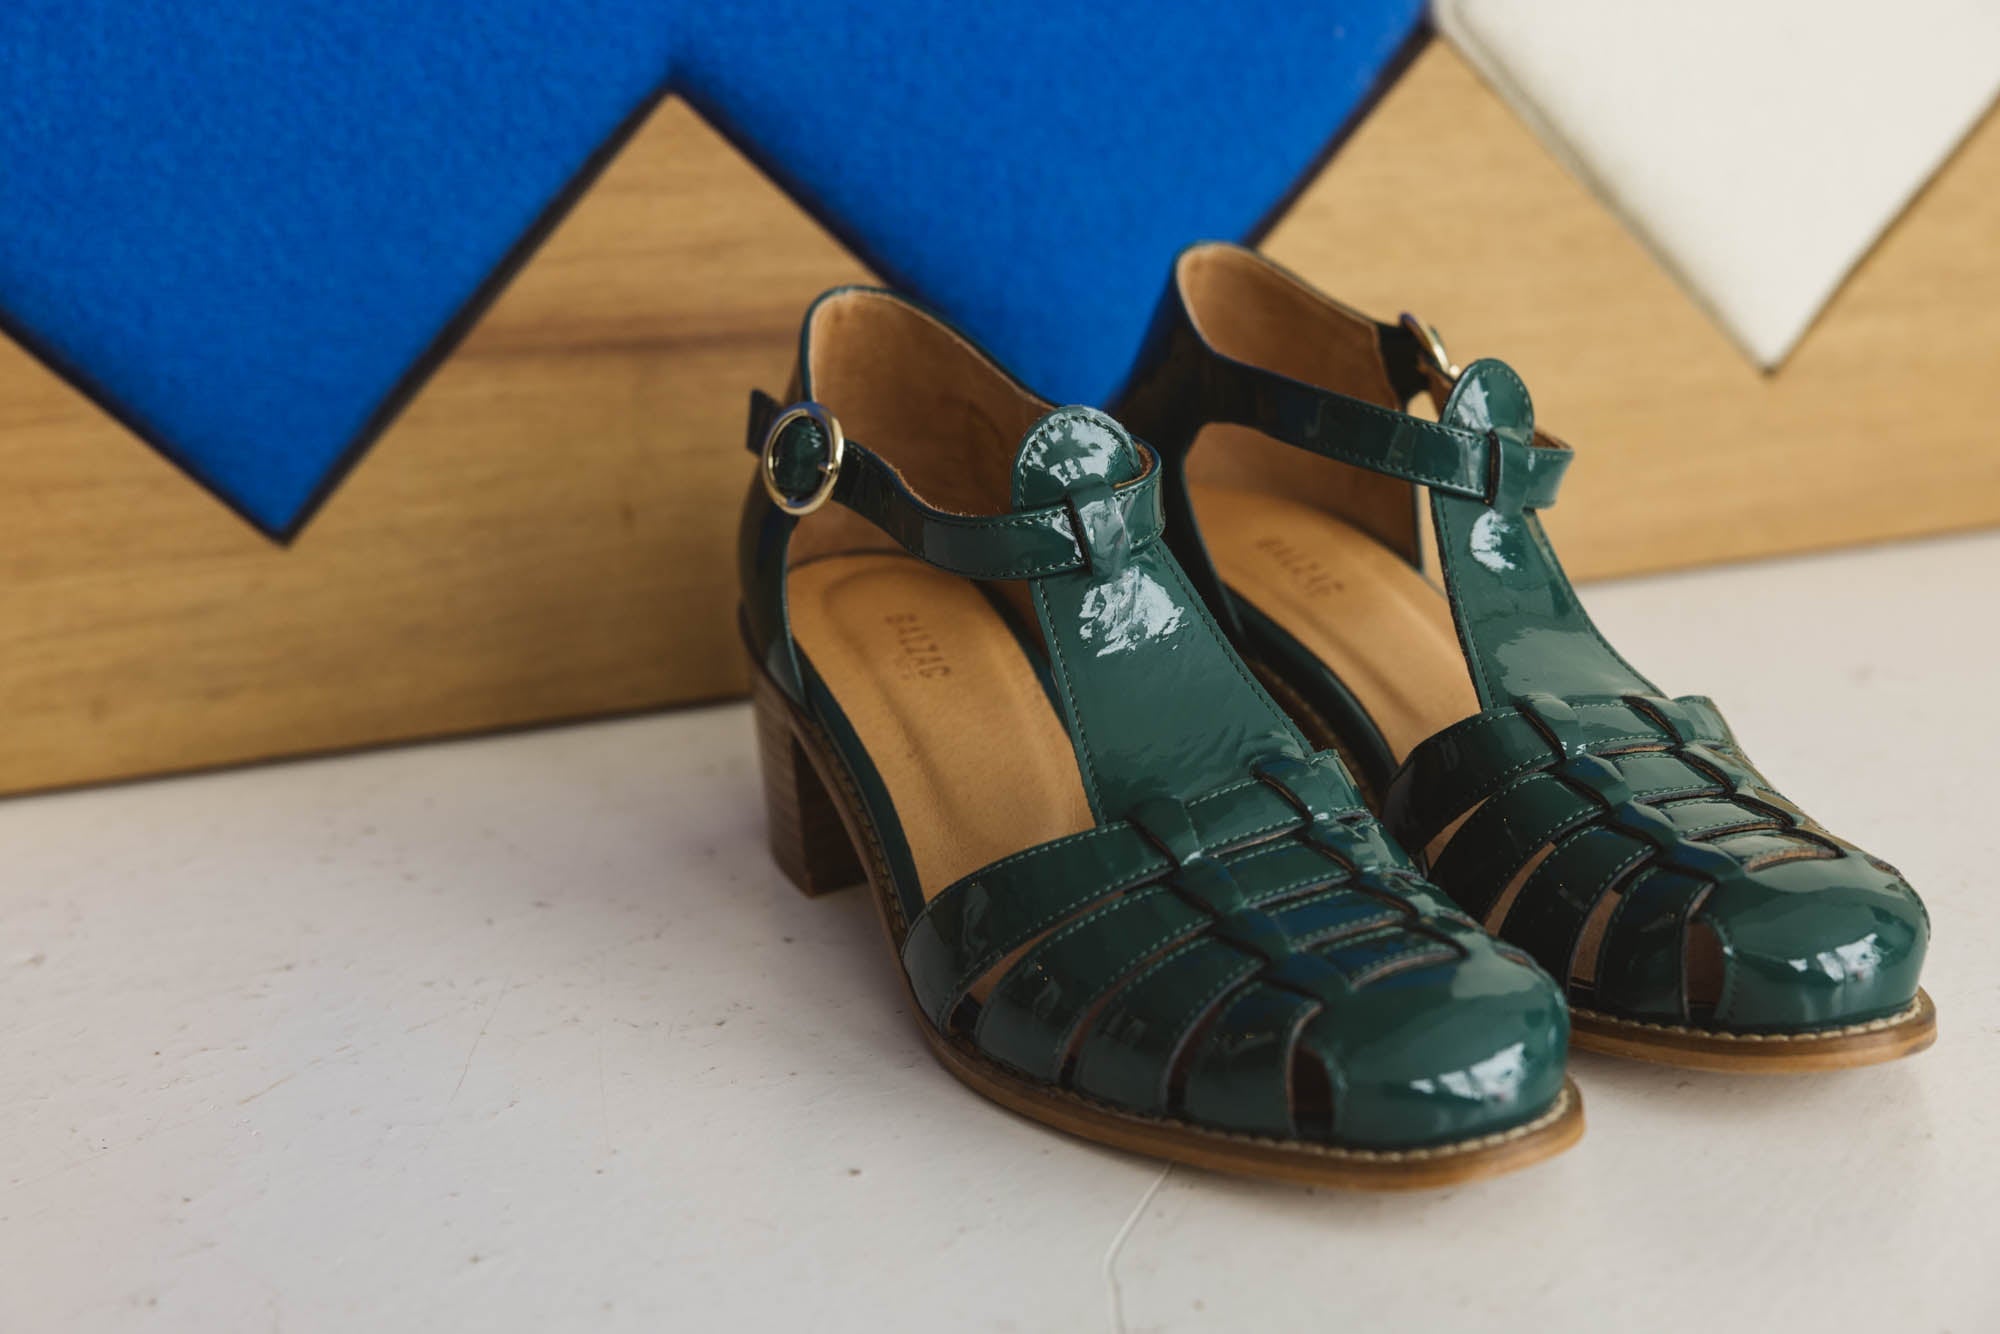 Albane green patent Mary Janes